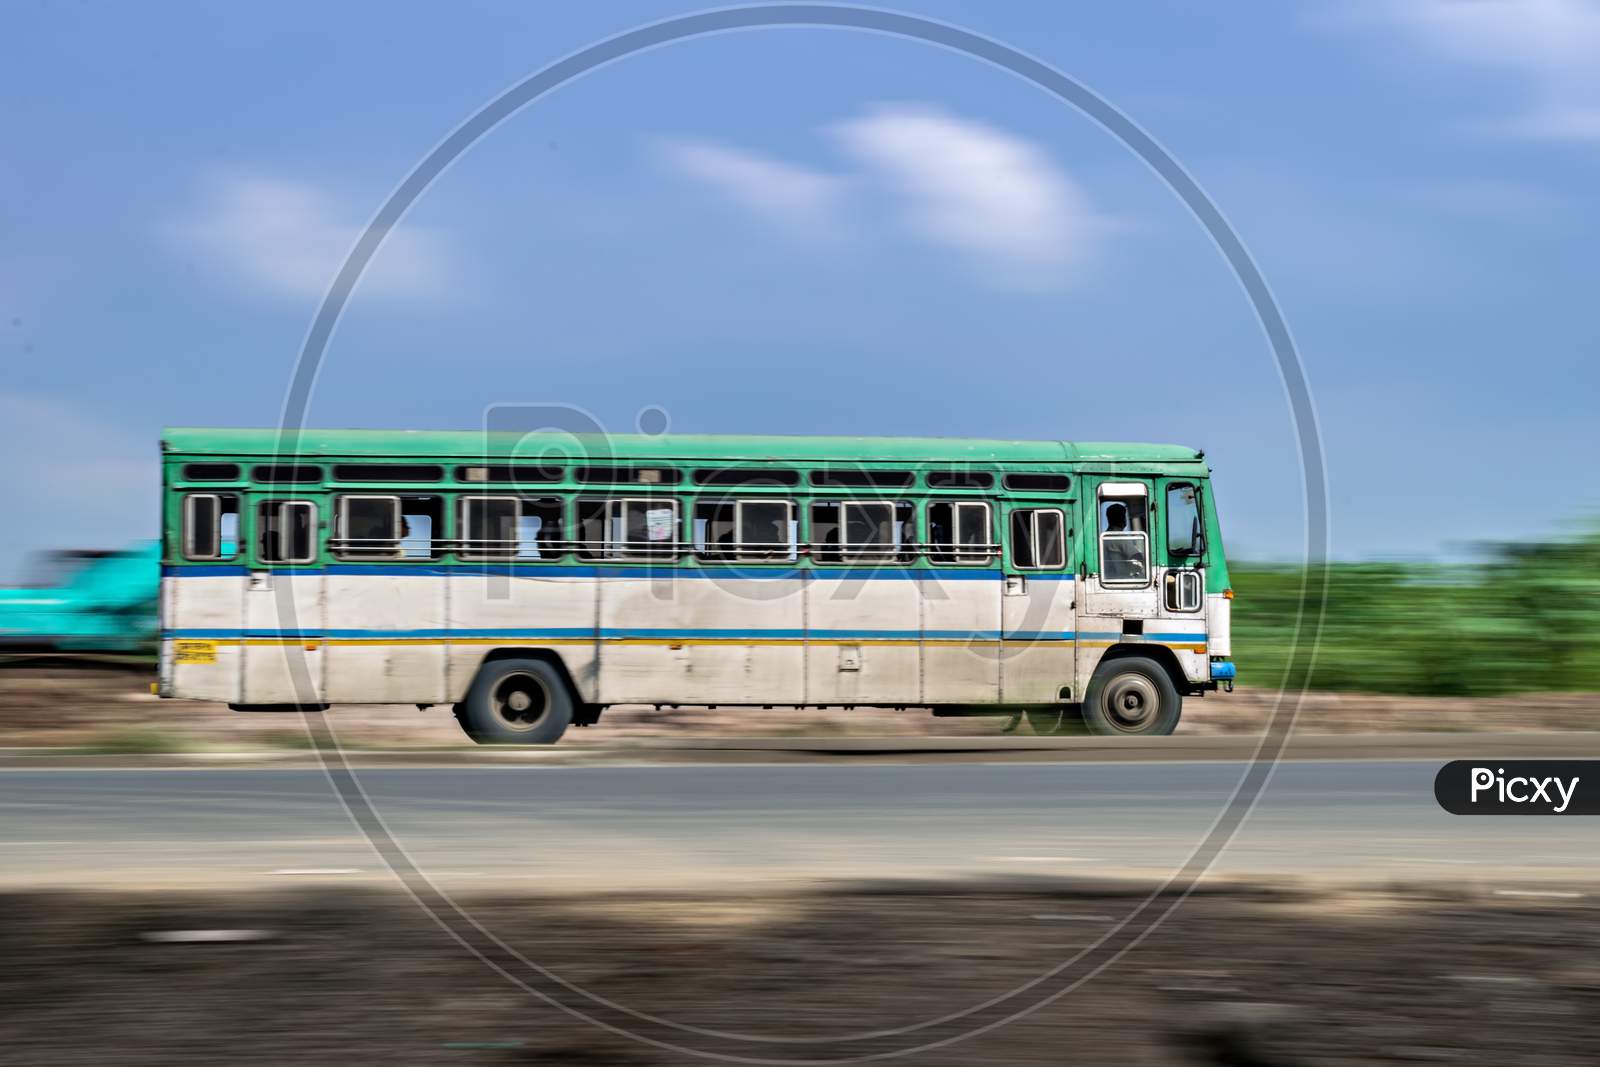 Motion Blur Image Of Non Air-Conditioned Intercity Bus In Maharashtra.